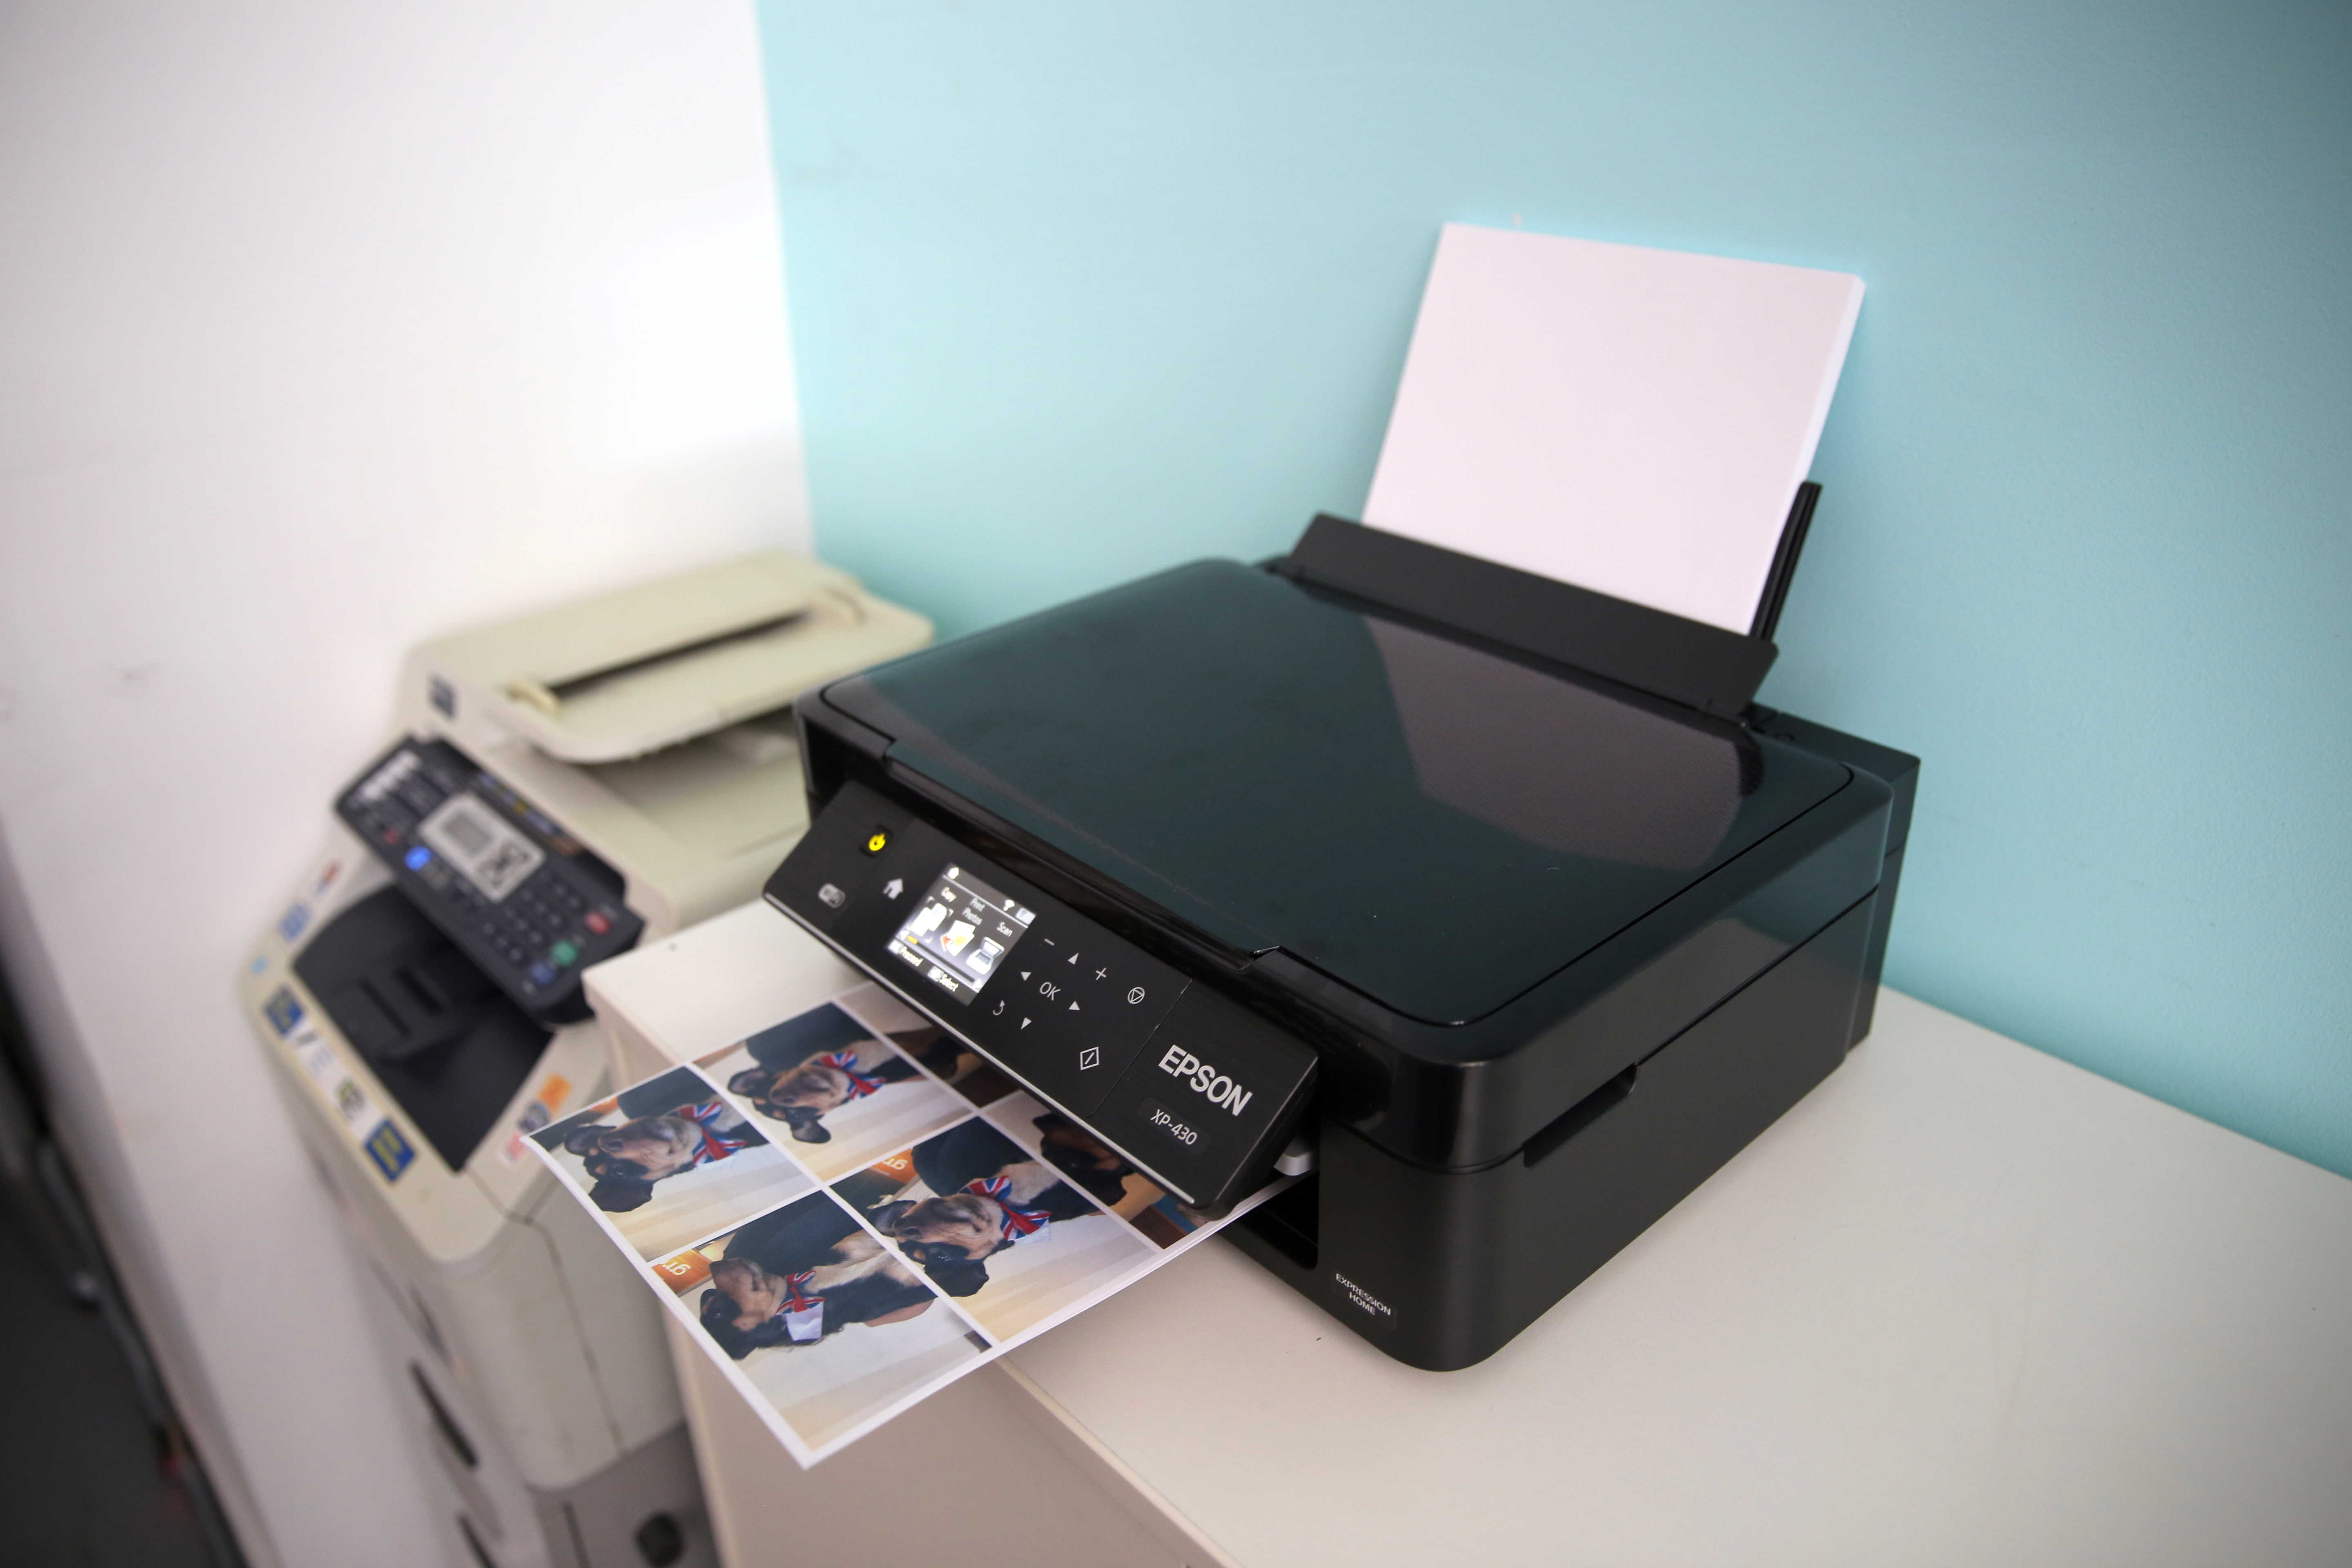 Epson Expression Home XP-430 multifunction printer